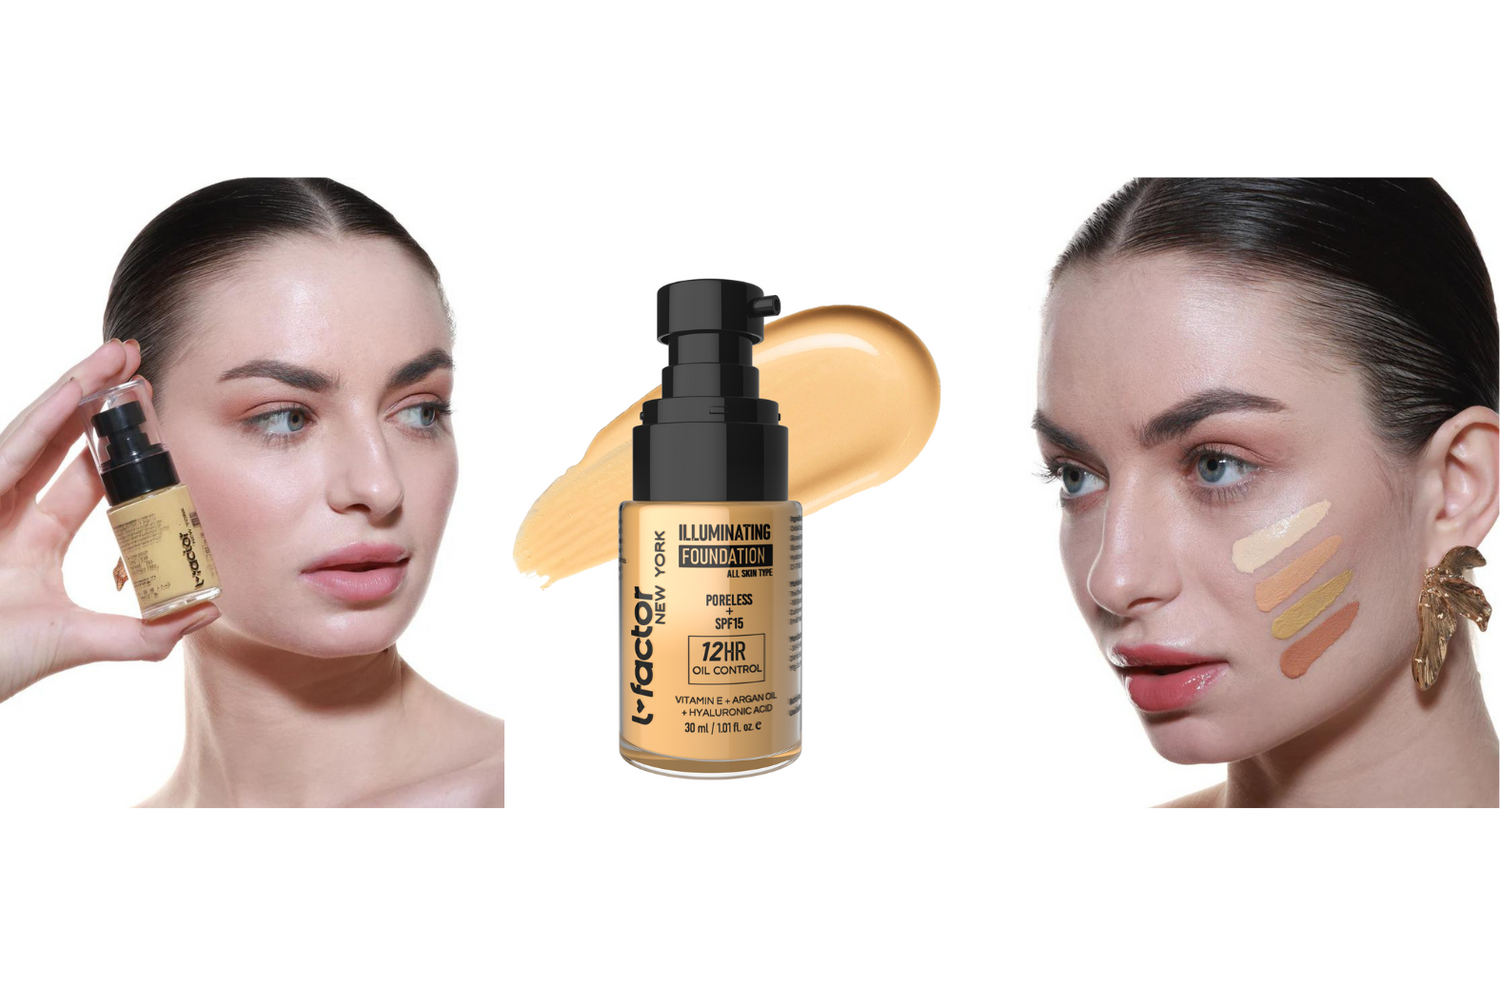 Light, Medium, and High Foundation Coverage: What's Best for You?